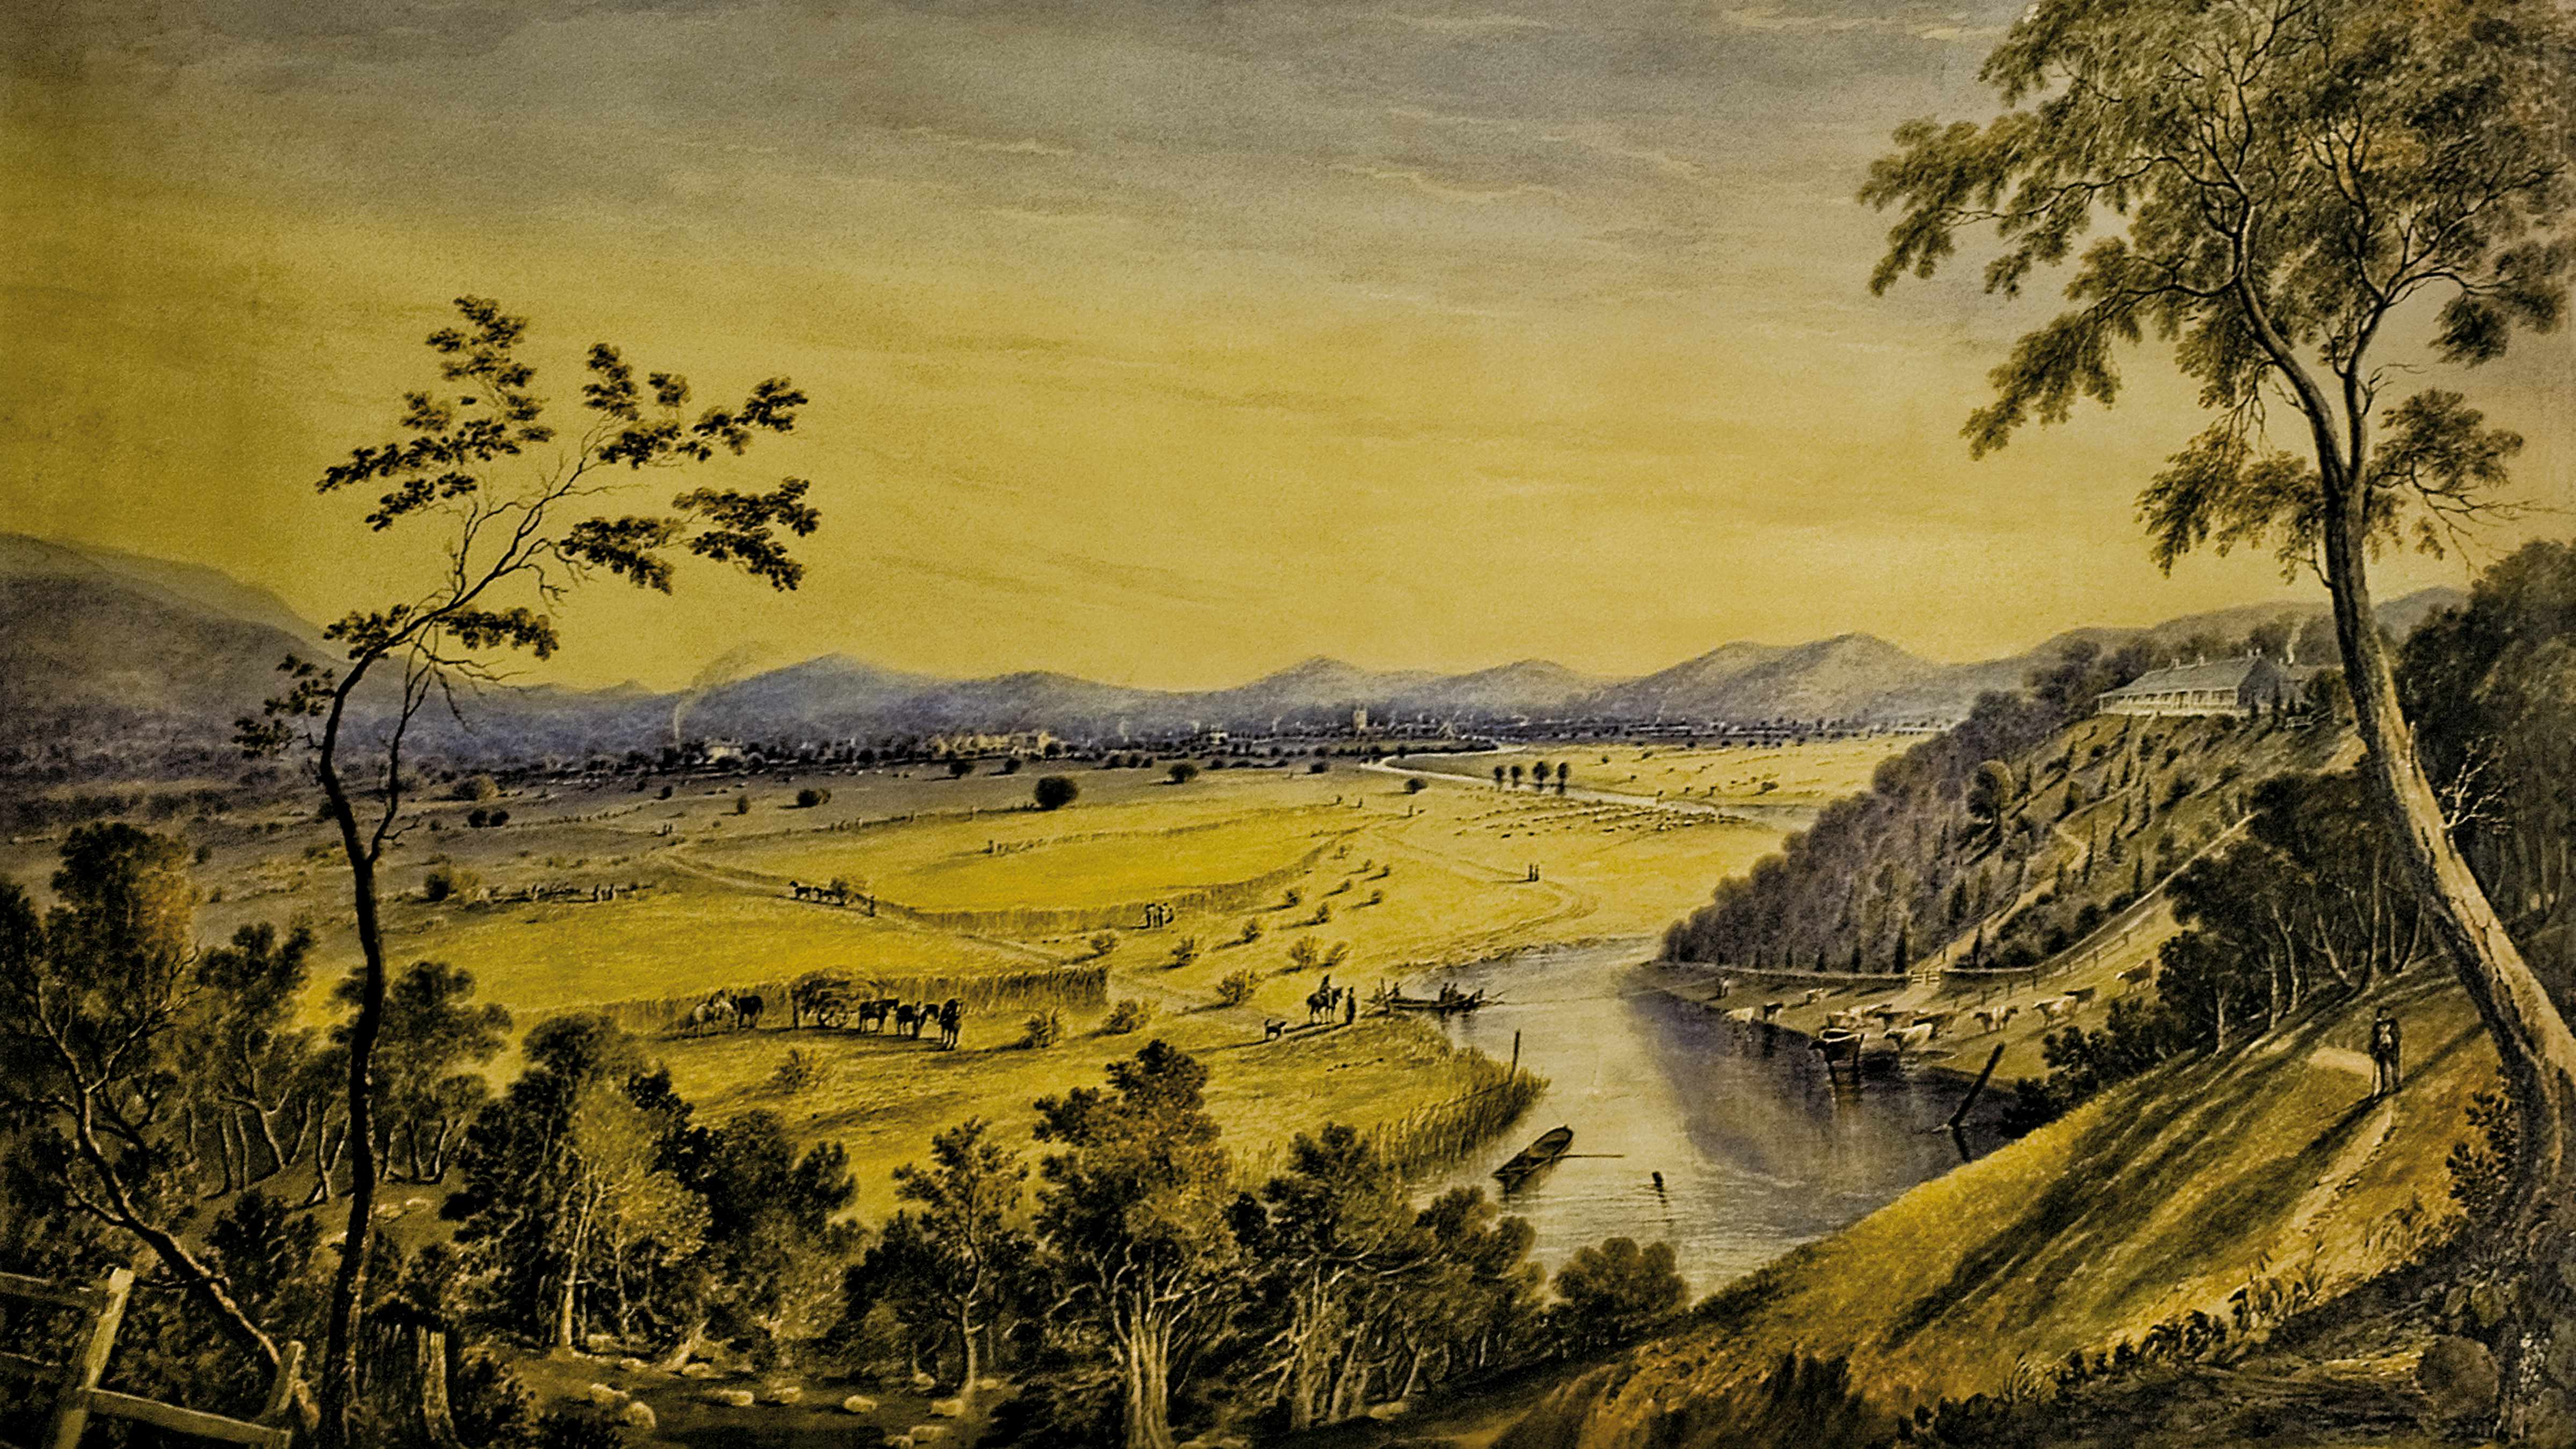 Oil painting of Norfolk Plains by William Thomas Lyttleton. Painted 1833. It shows Woolmers in the foreground and Brickendon in the distance across the Lake River, renamed the Macquarie River. Image shows men and bullocks working the fields, native trees and a punt that crosses the river. Source: Brickendon Estate Archives.